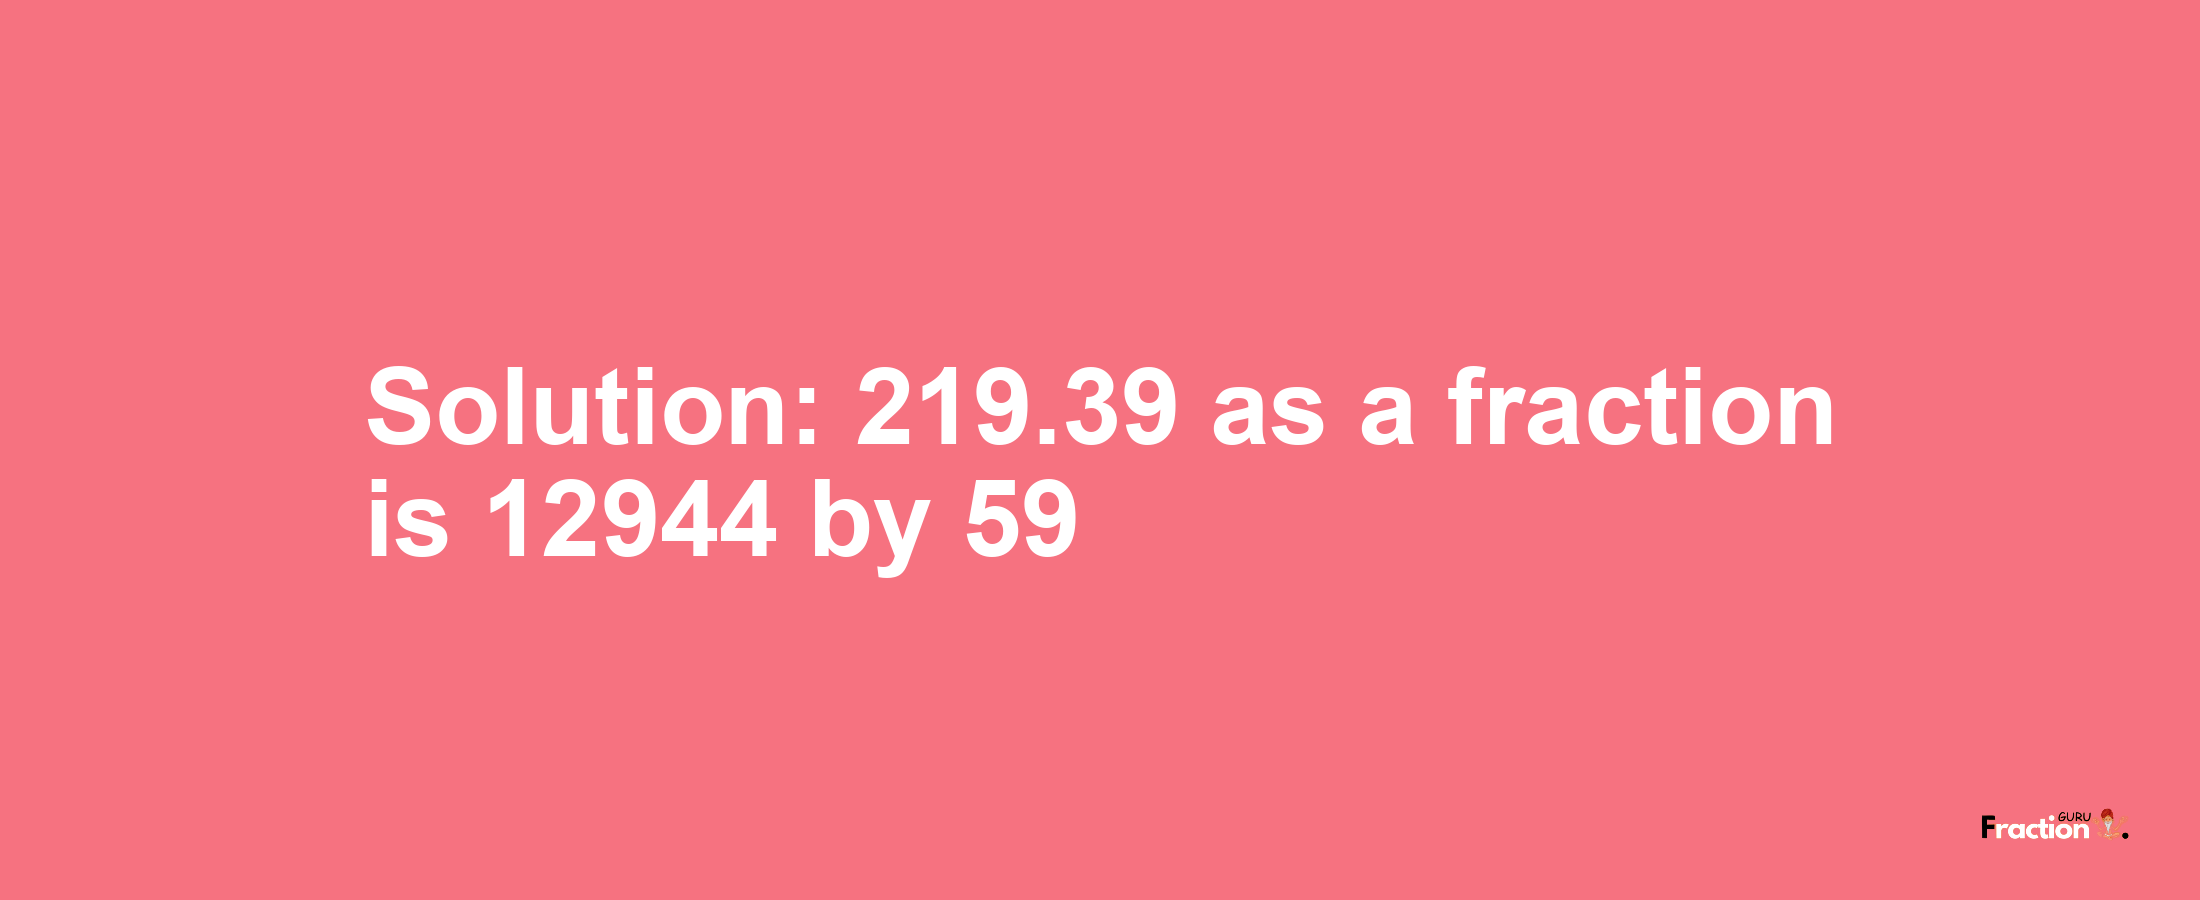 Solution:219.39 as a fraction is 12944/59